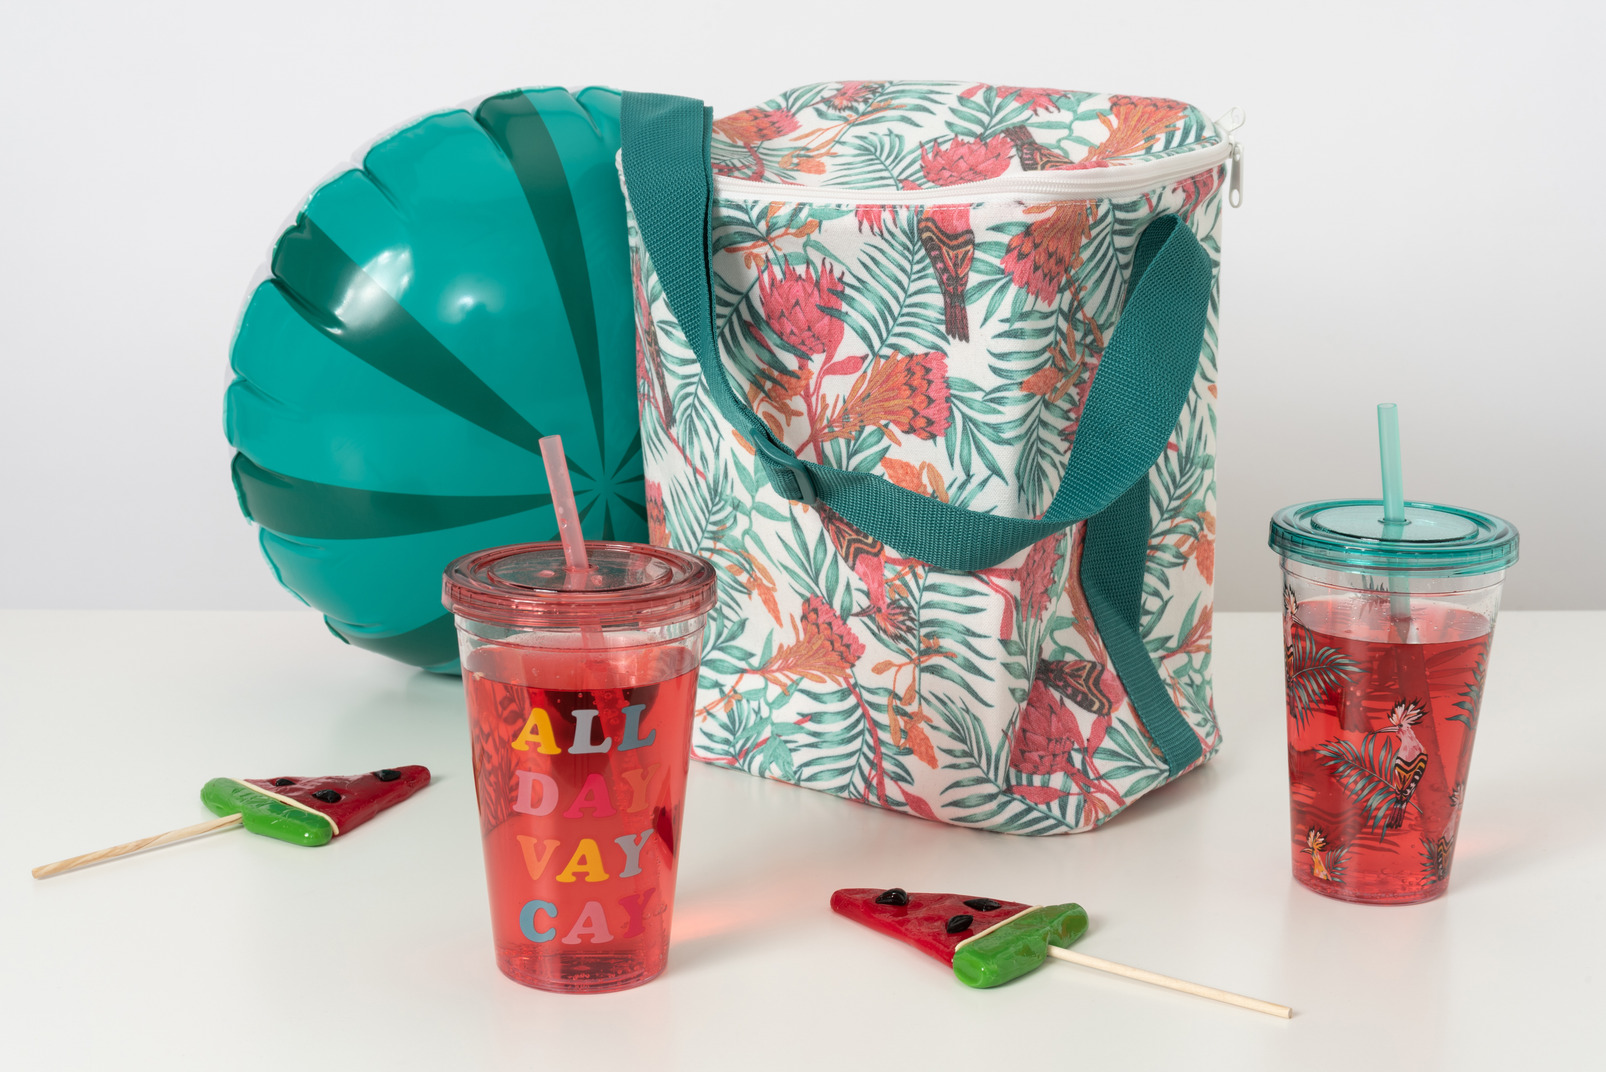 A thermal bag with food for a picnic, an inflatable toy to have some fun in water and drinks on top of all of that, as the best recipe for a hot summer day off